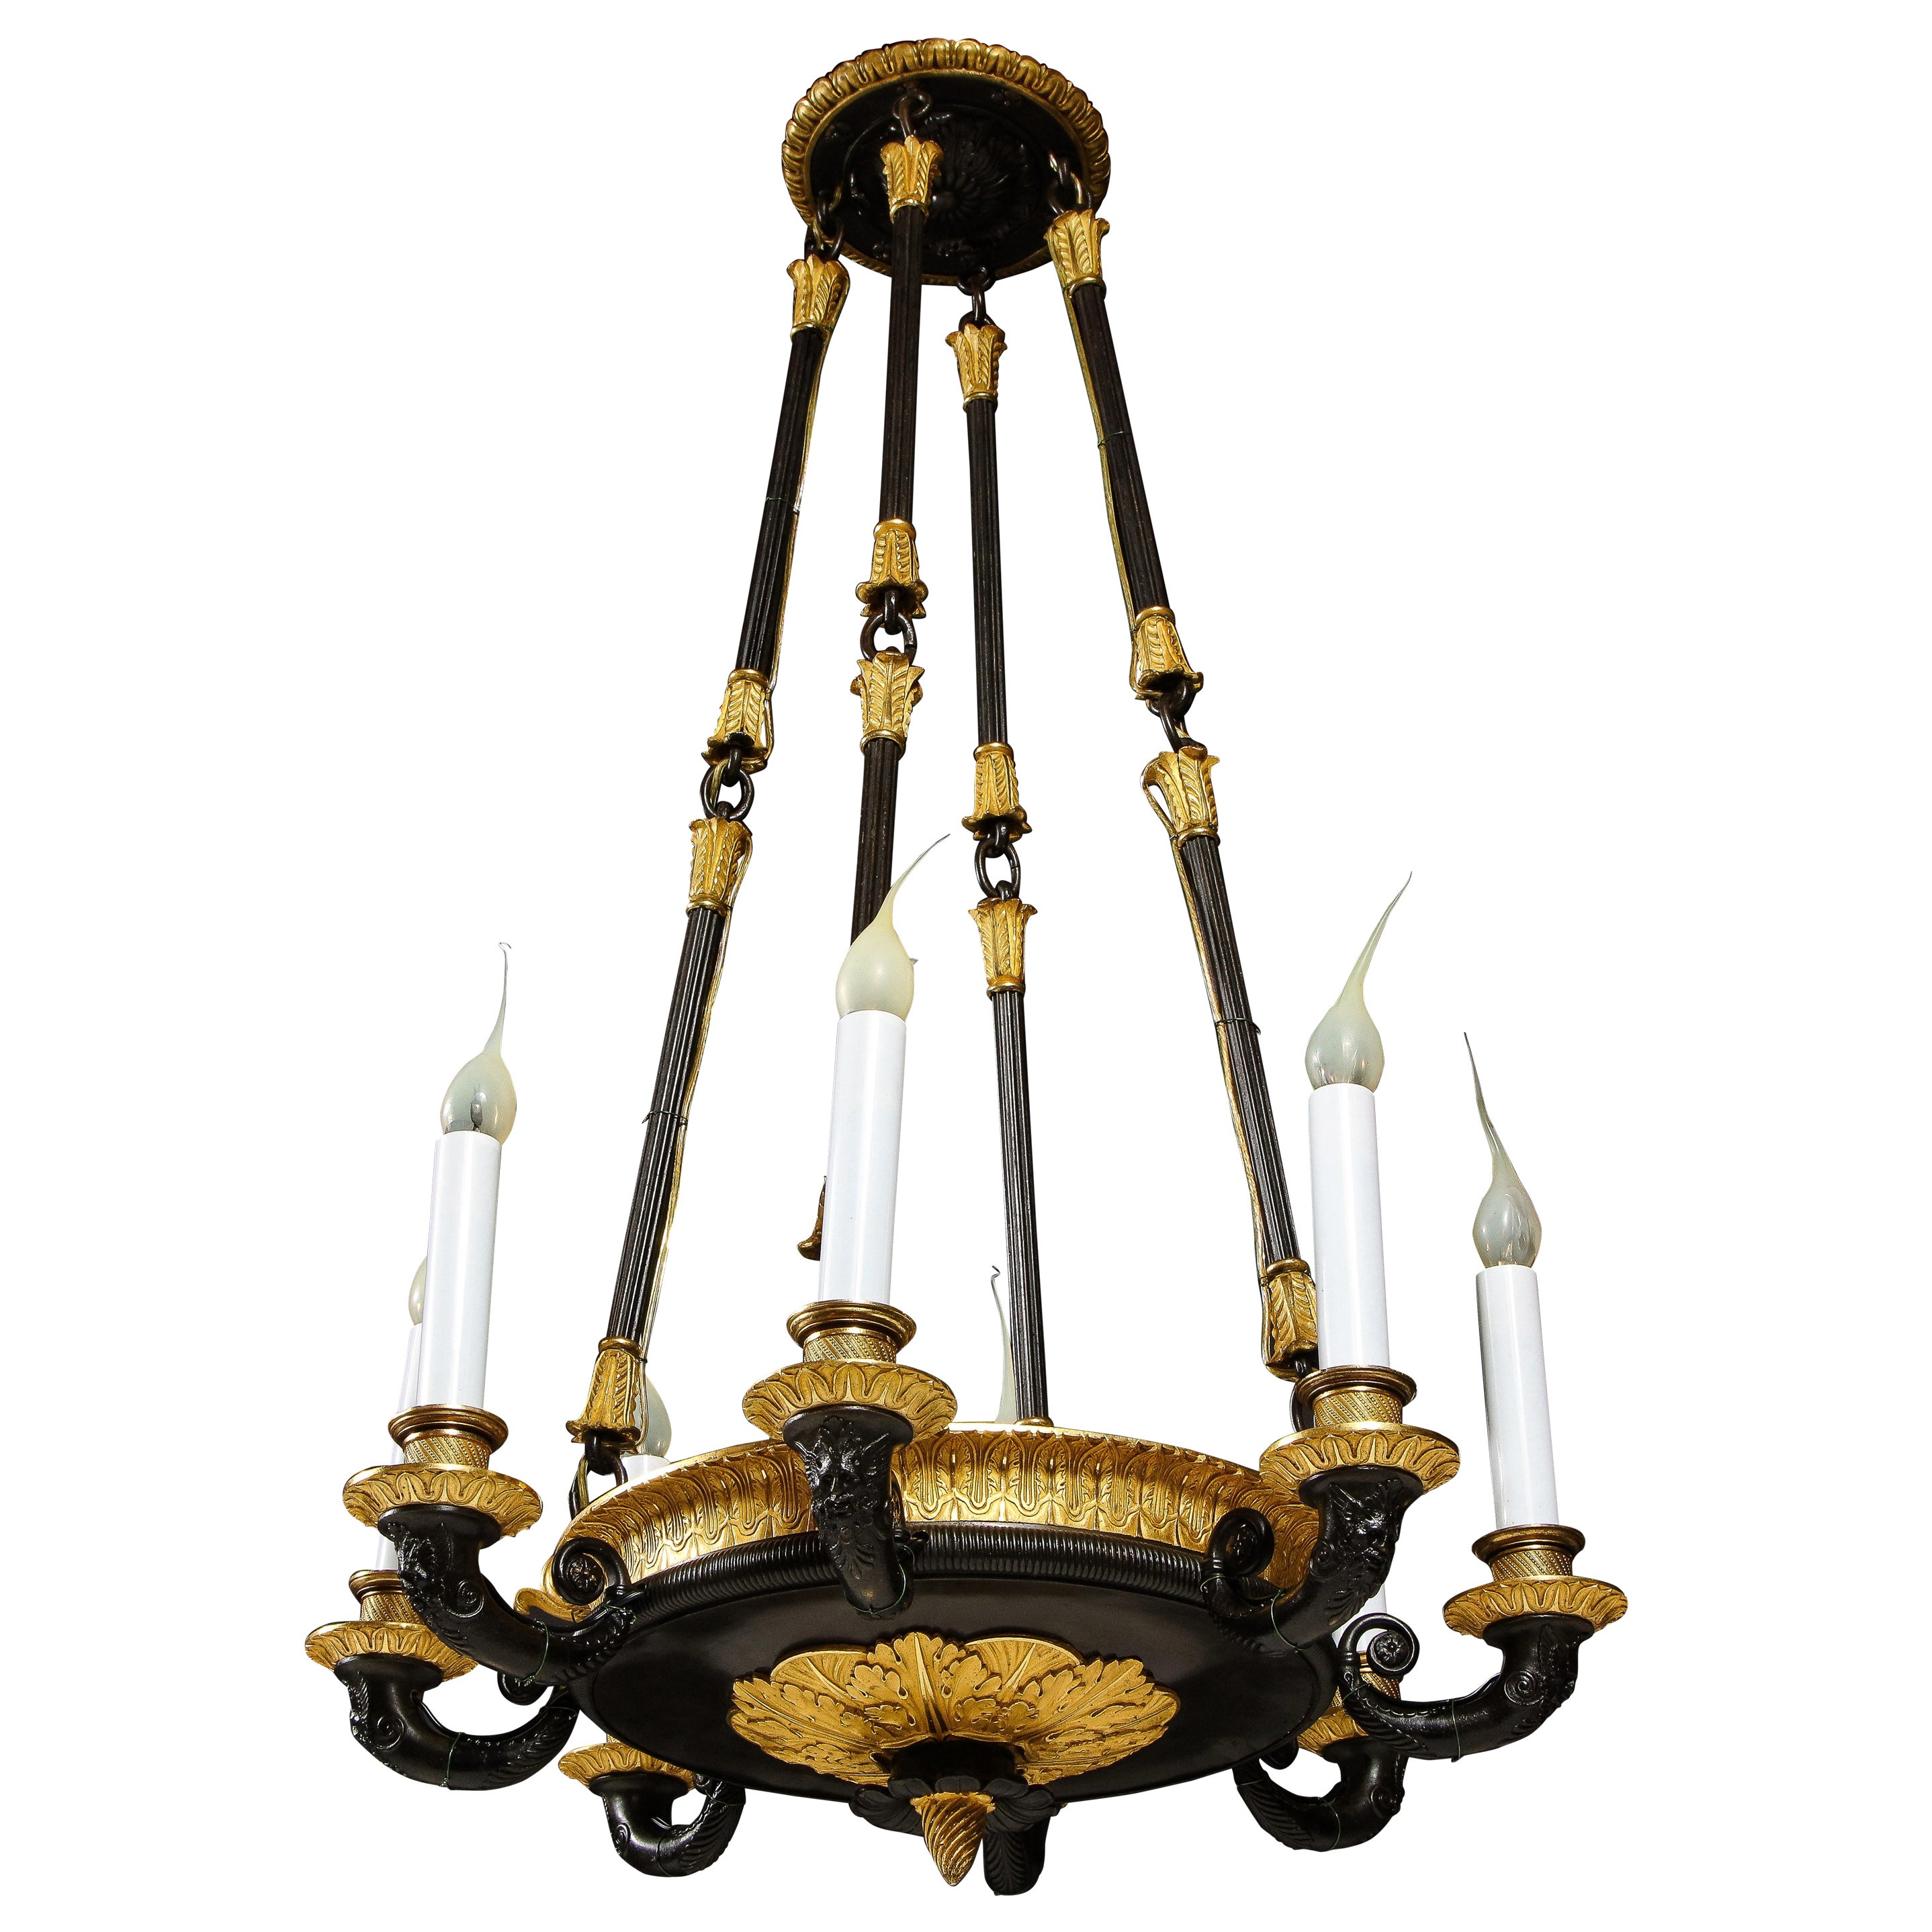 Antique French Empire Style Gilt and Patinated Bronze Chandelier